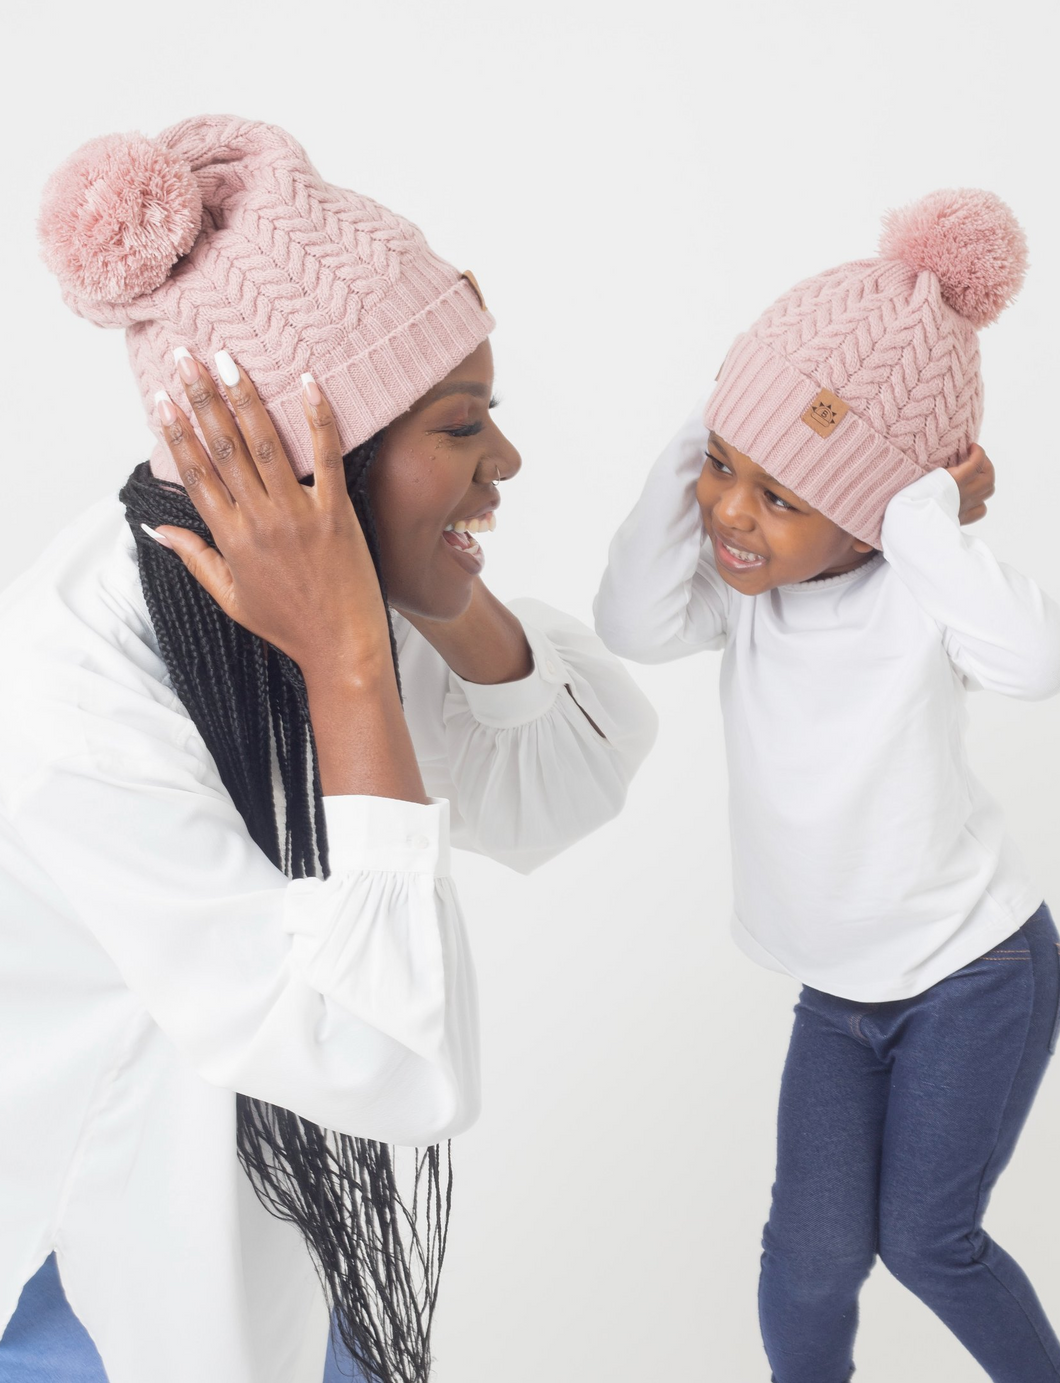 Mummy and Me Dusted Rose Bobble Hats - Black Sunrise UK Satin Lined Hats,. Satin lined Beanie, Hoodies. For children, adults, babies. For those with curly natural hair, sensitive scalps and fragile curls.